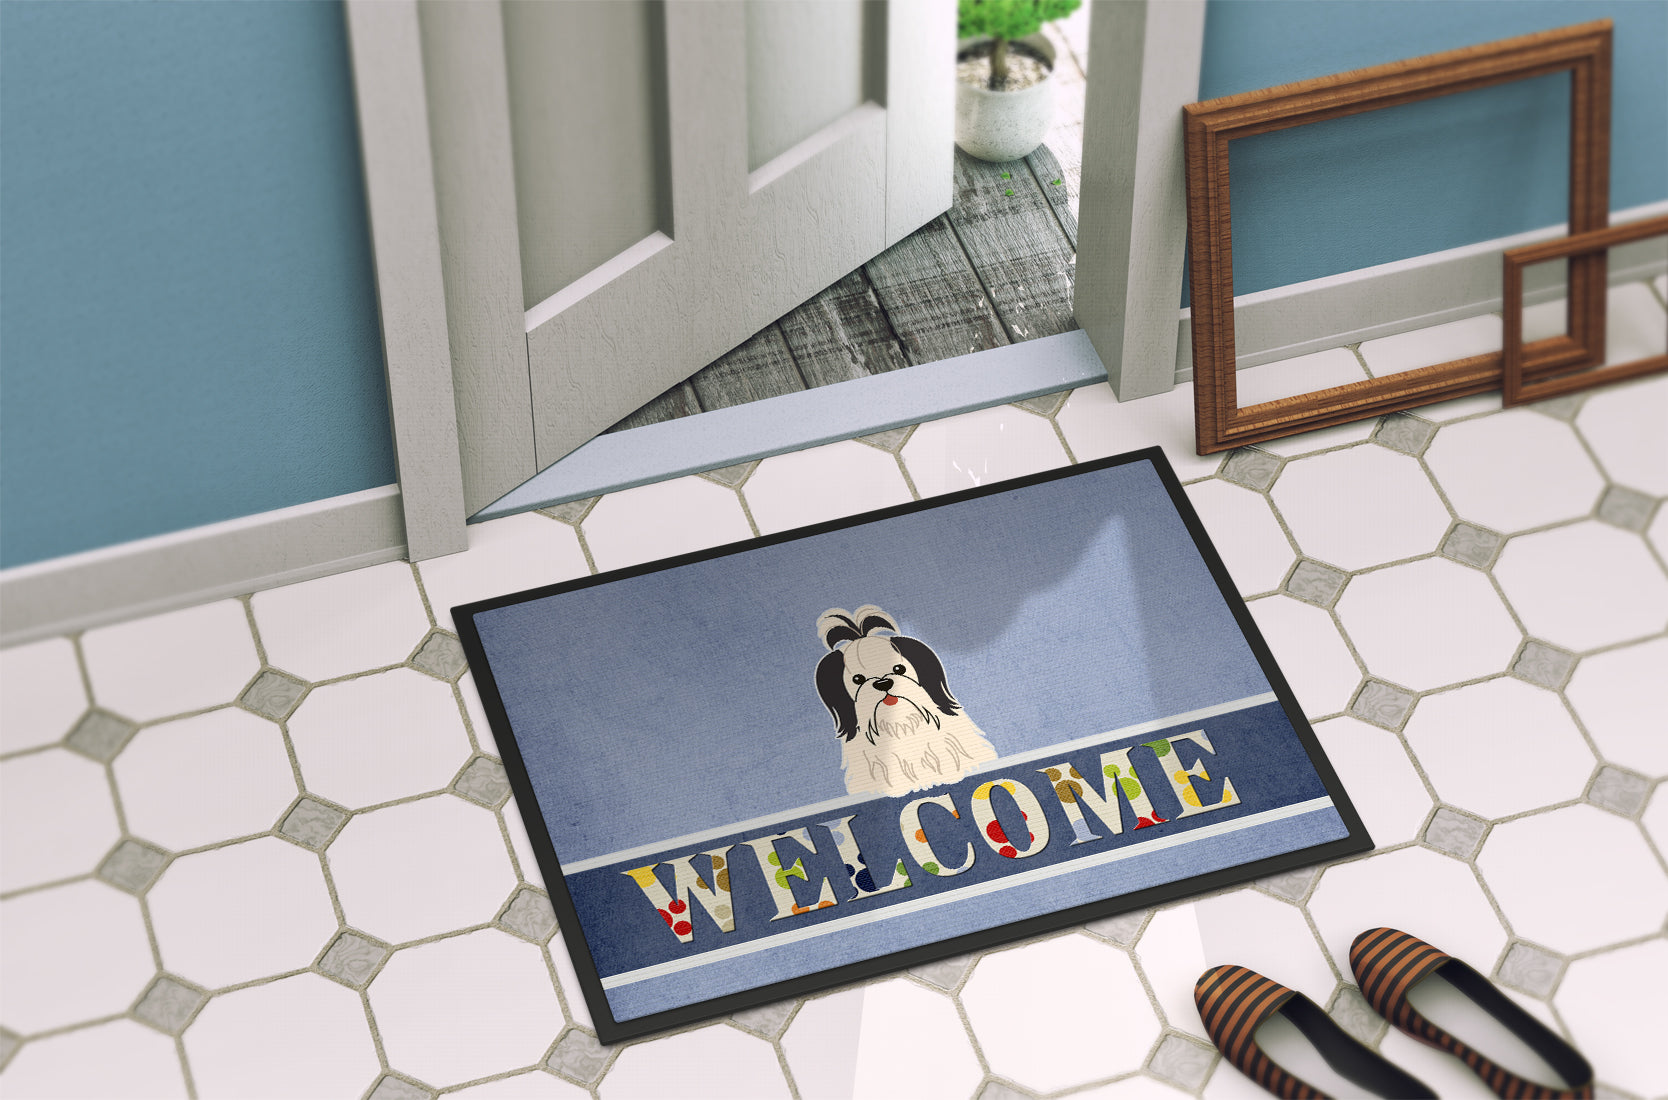 Shih Tzu Black White Welcome Indoor or Outdoor Mat 18x27 BB5669MAT - the-store.com